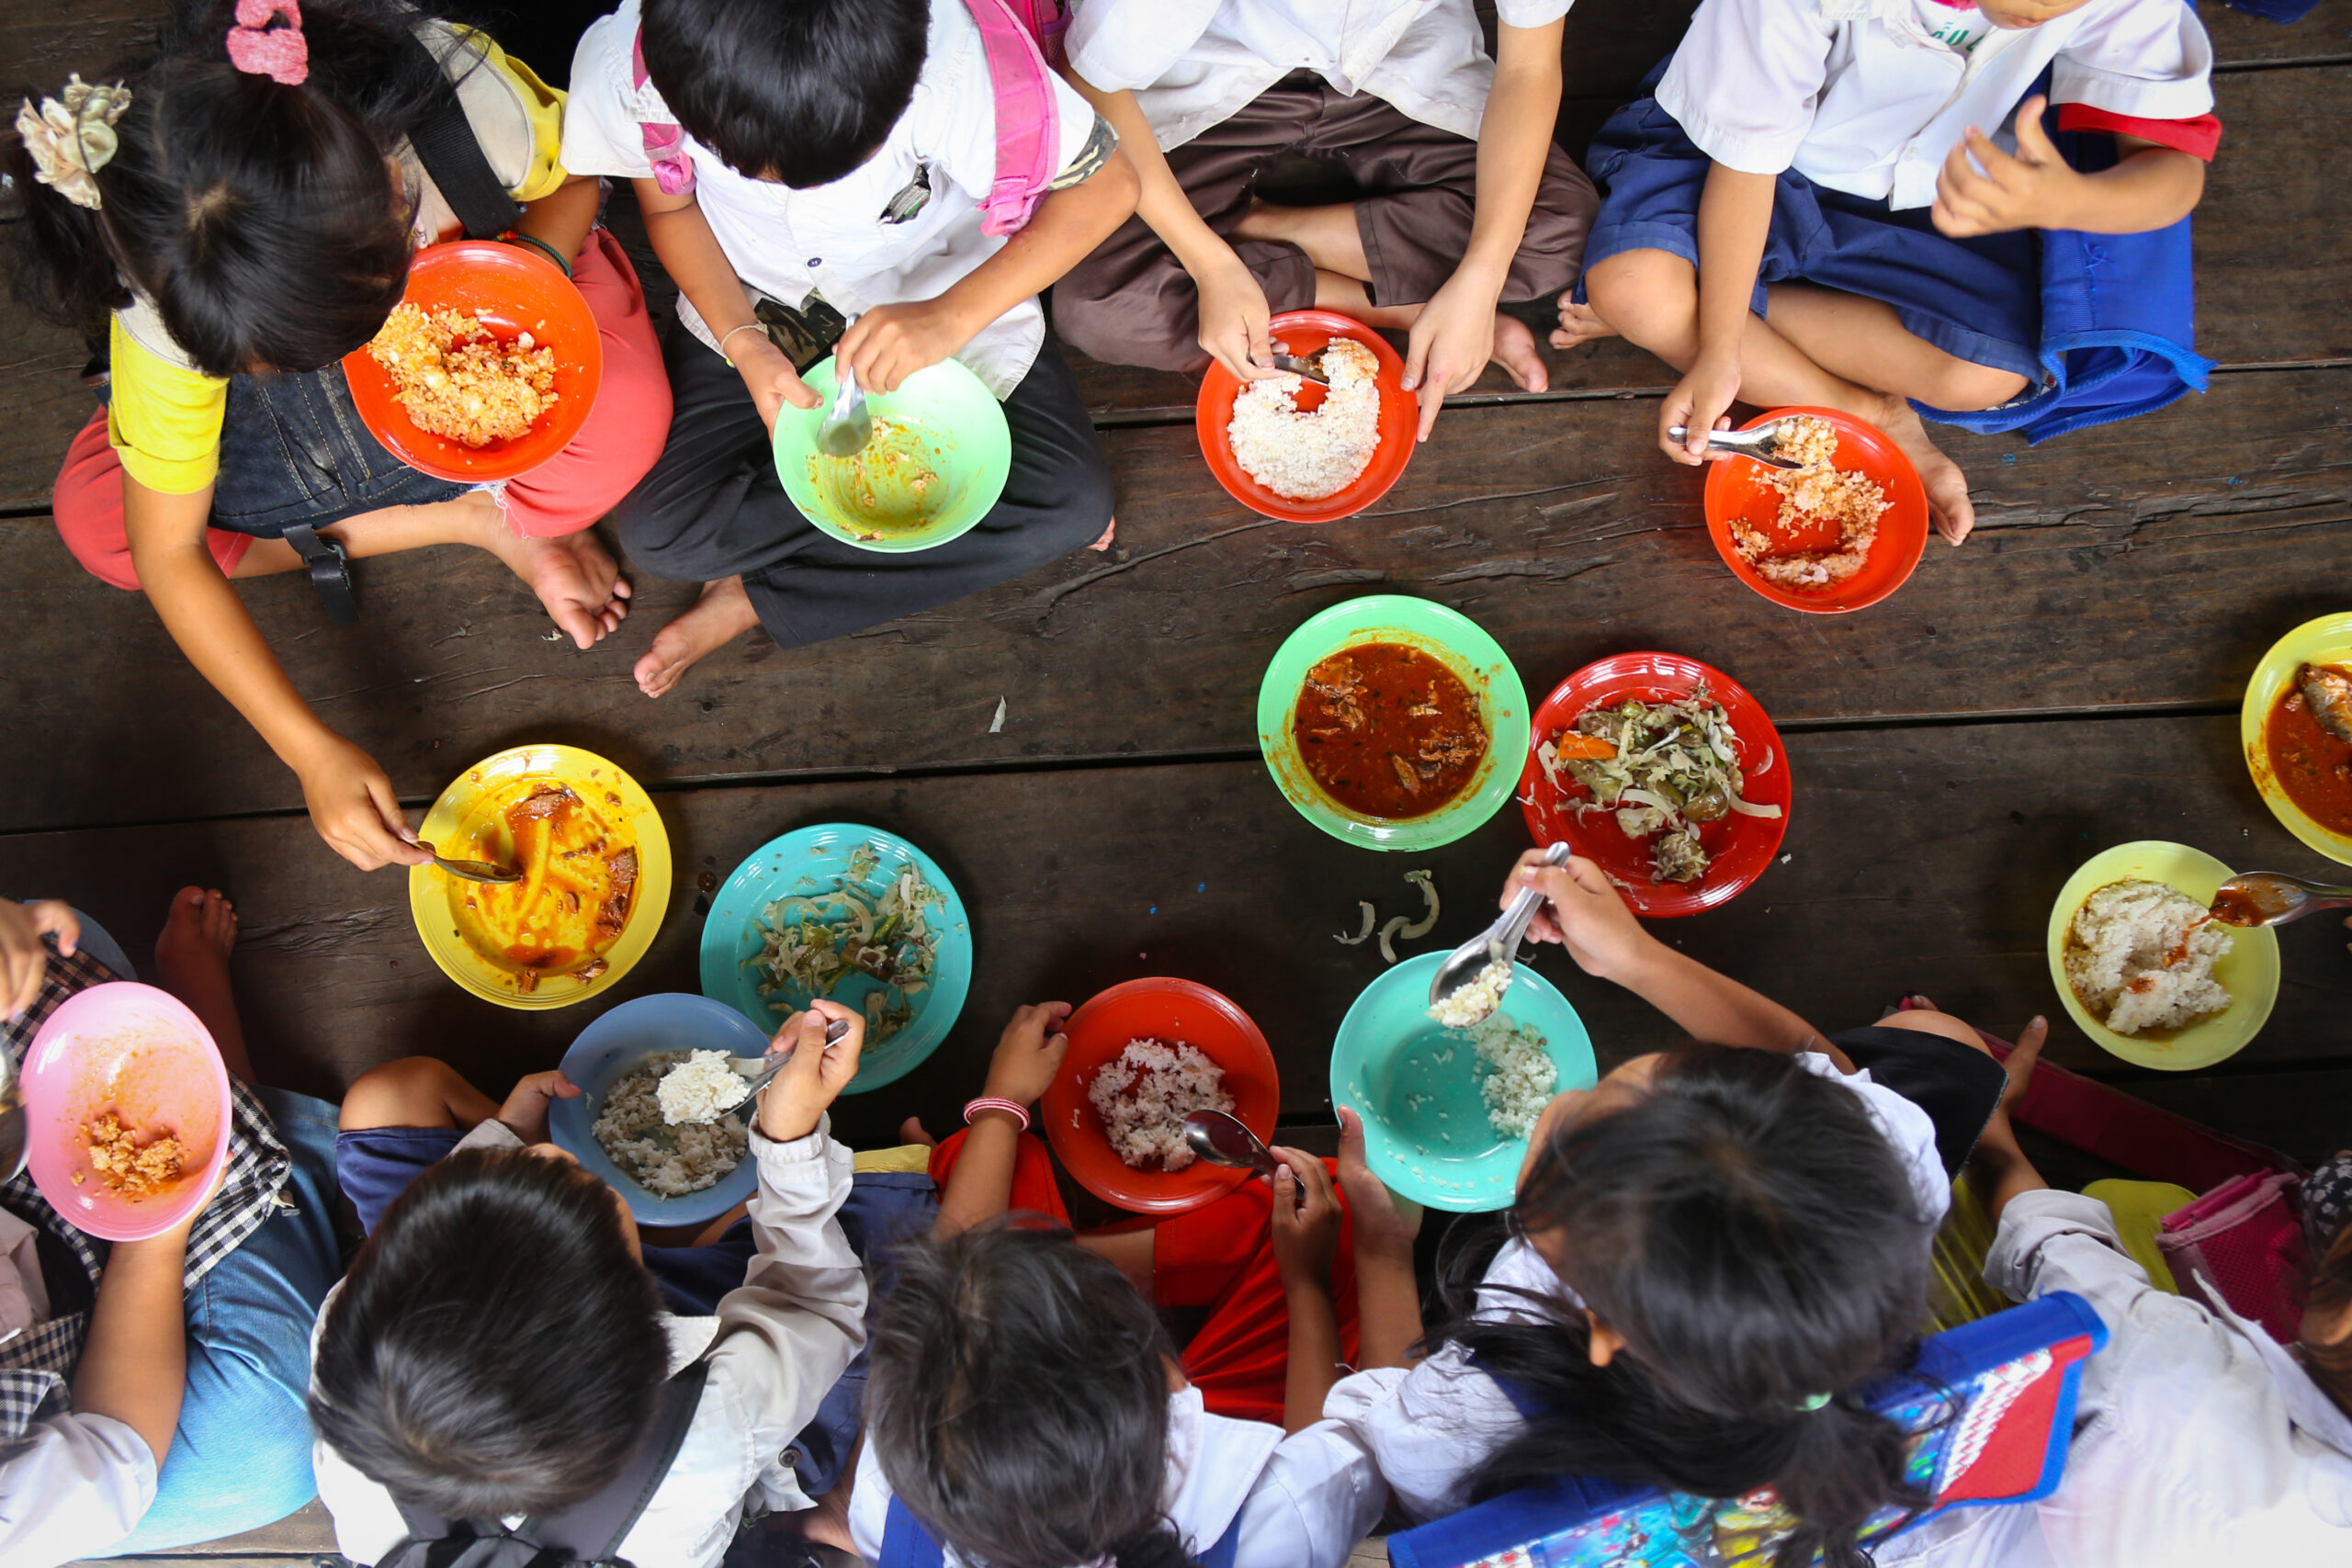 Overhead view of eight children sitting on a dark wooden floor in a circle, each eating from a colourful bowl in front of them. They all have dark hair, wearing white shirts and rucksacks on their back.